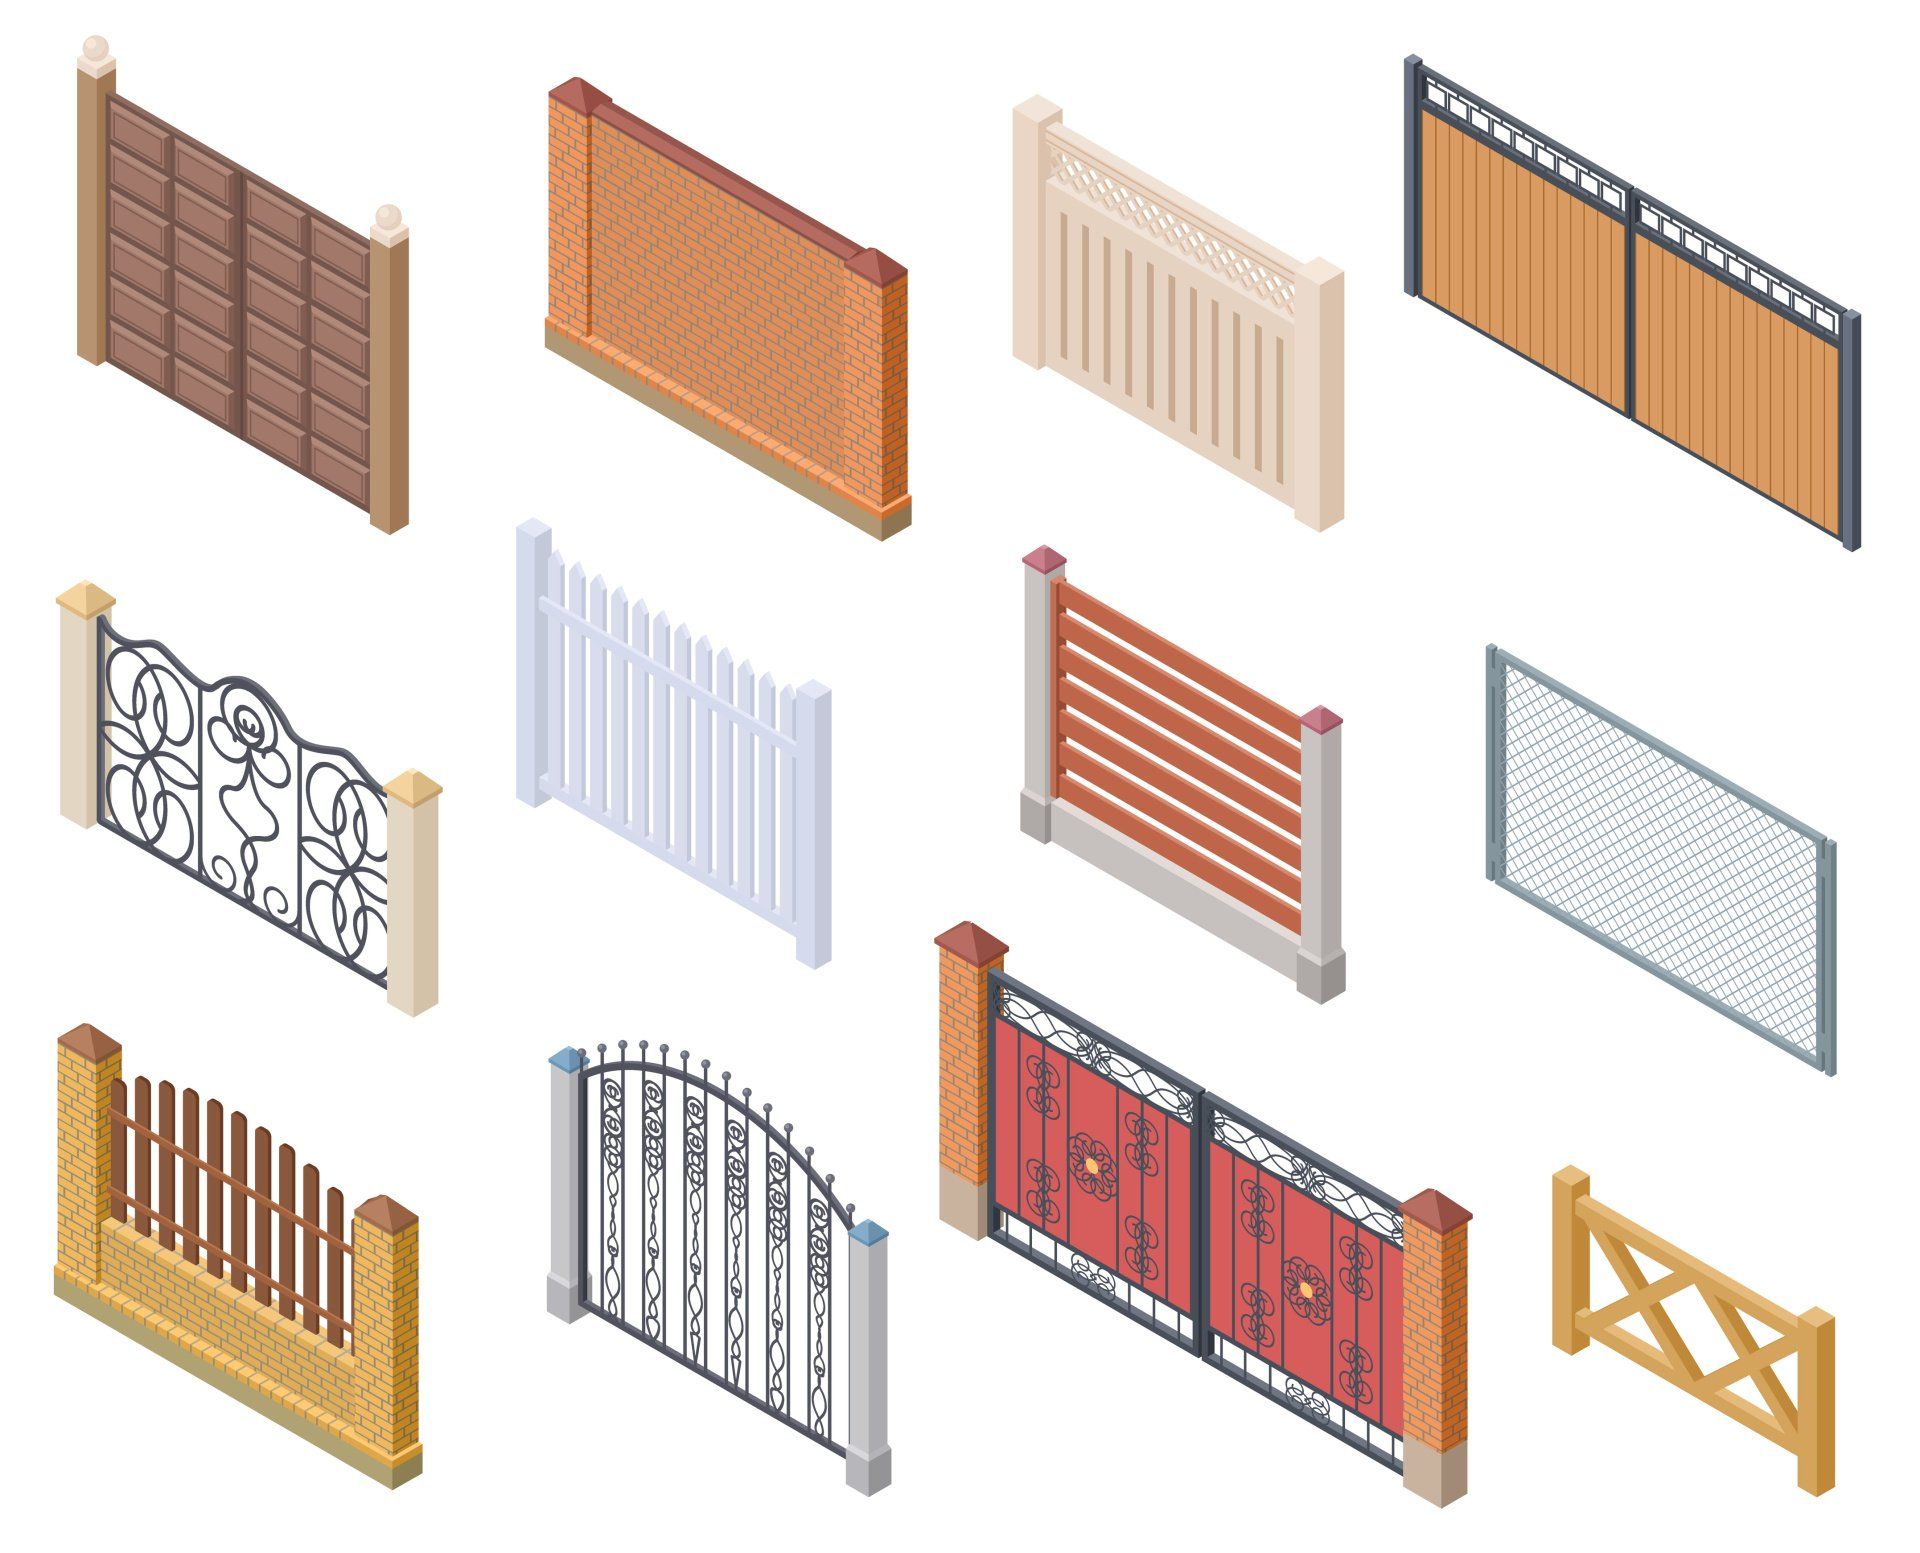 buy a fence styles cheapest option material low cost fence designs